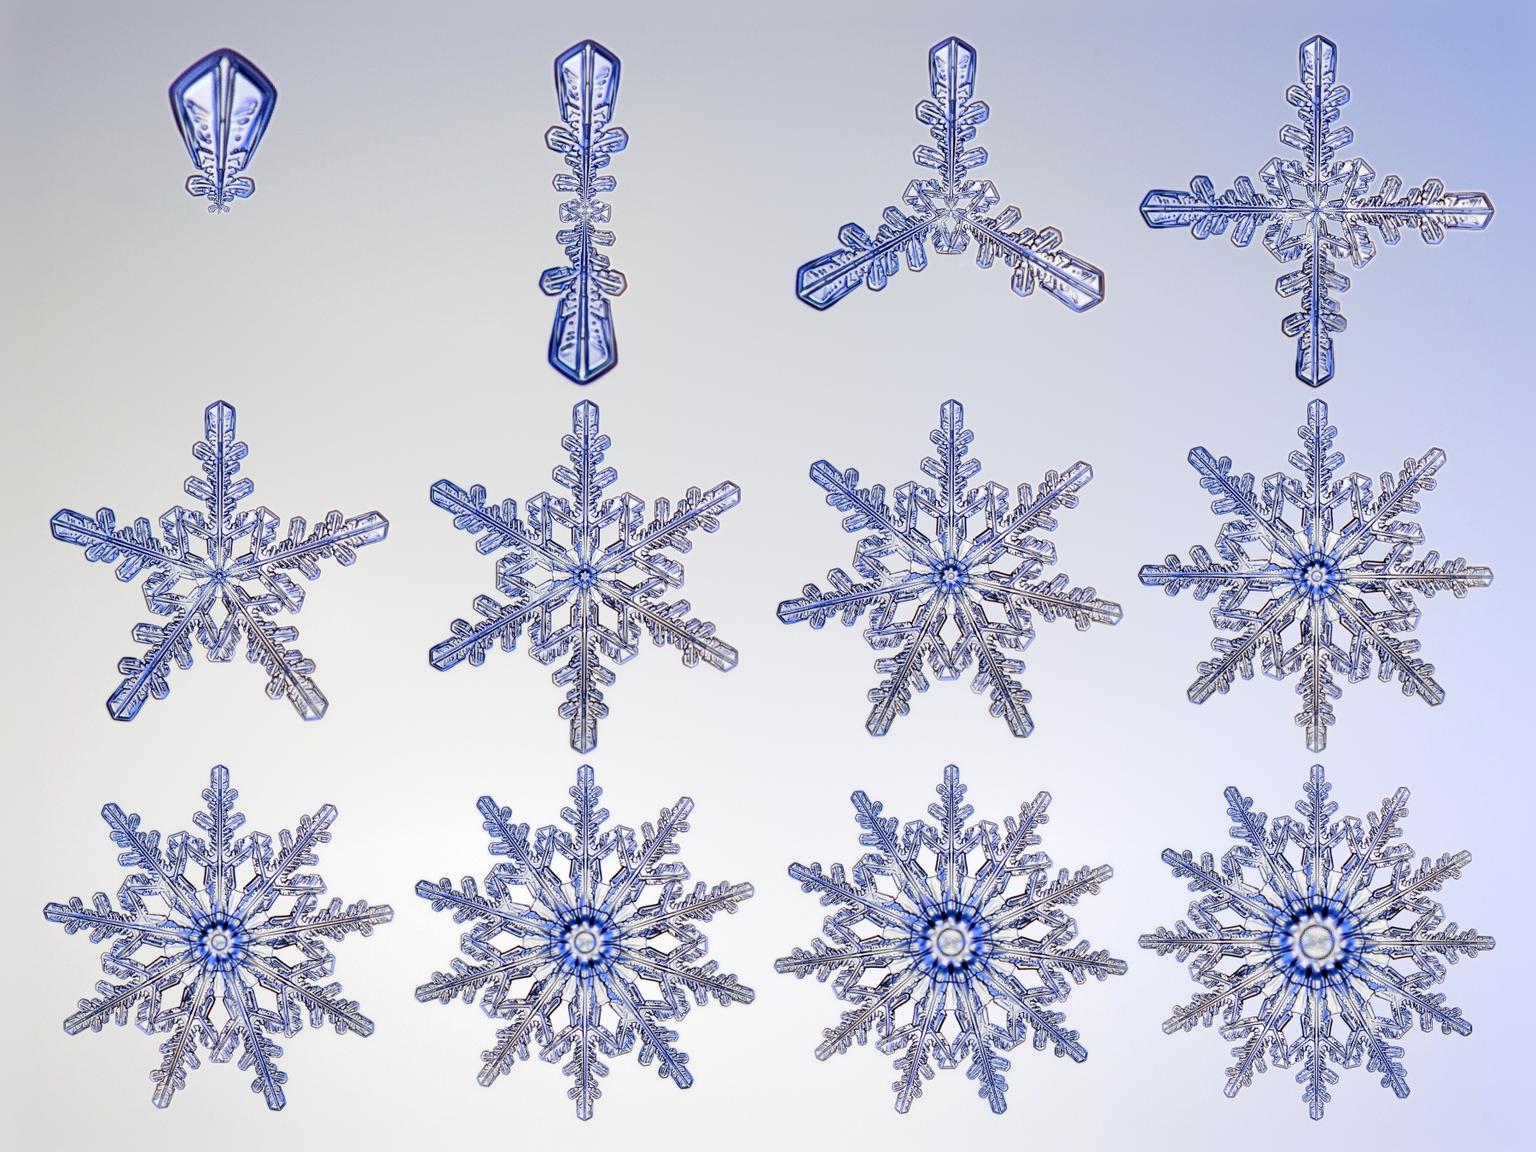 Image for entry 'Conformal Snowflakes'